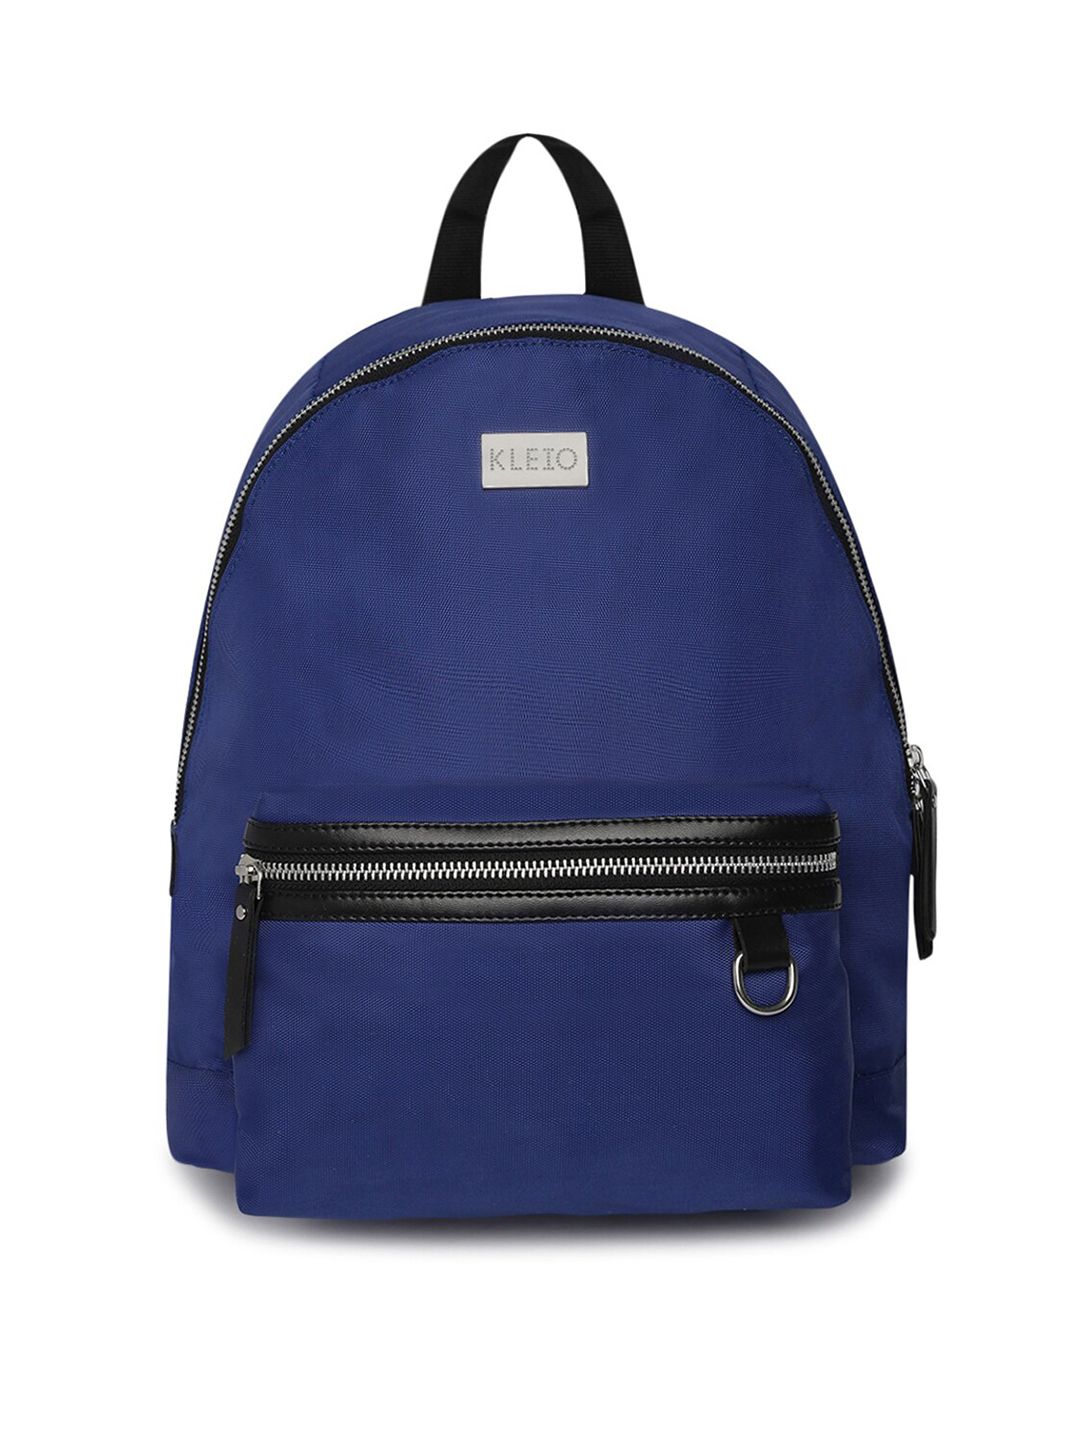 KLEIO Women Blue Light Weight Backpack Price in India